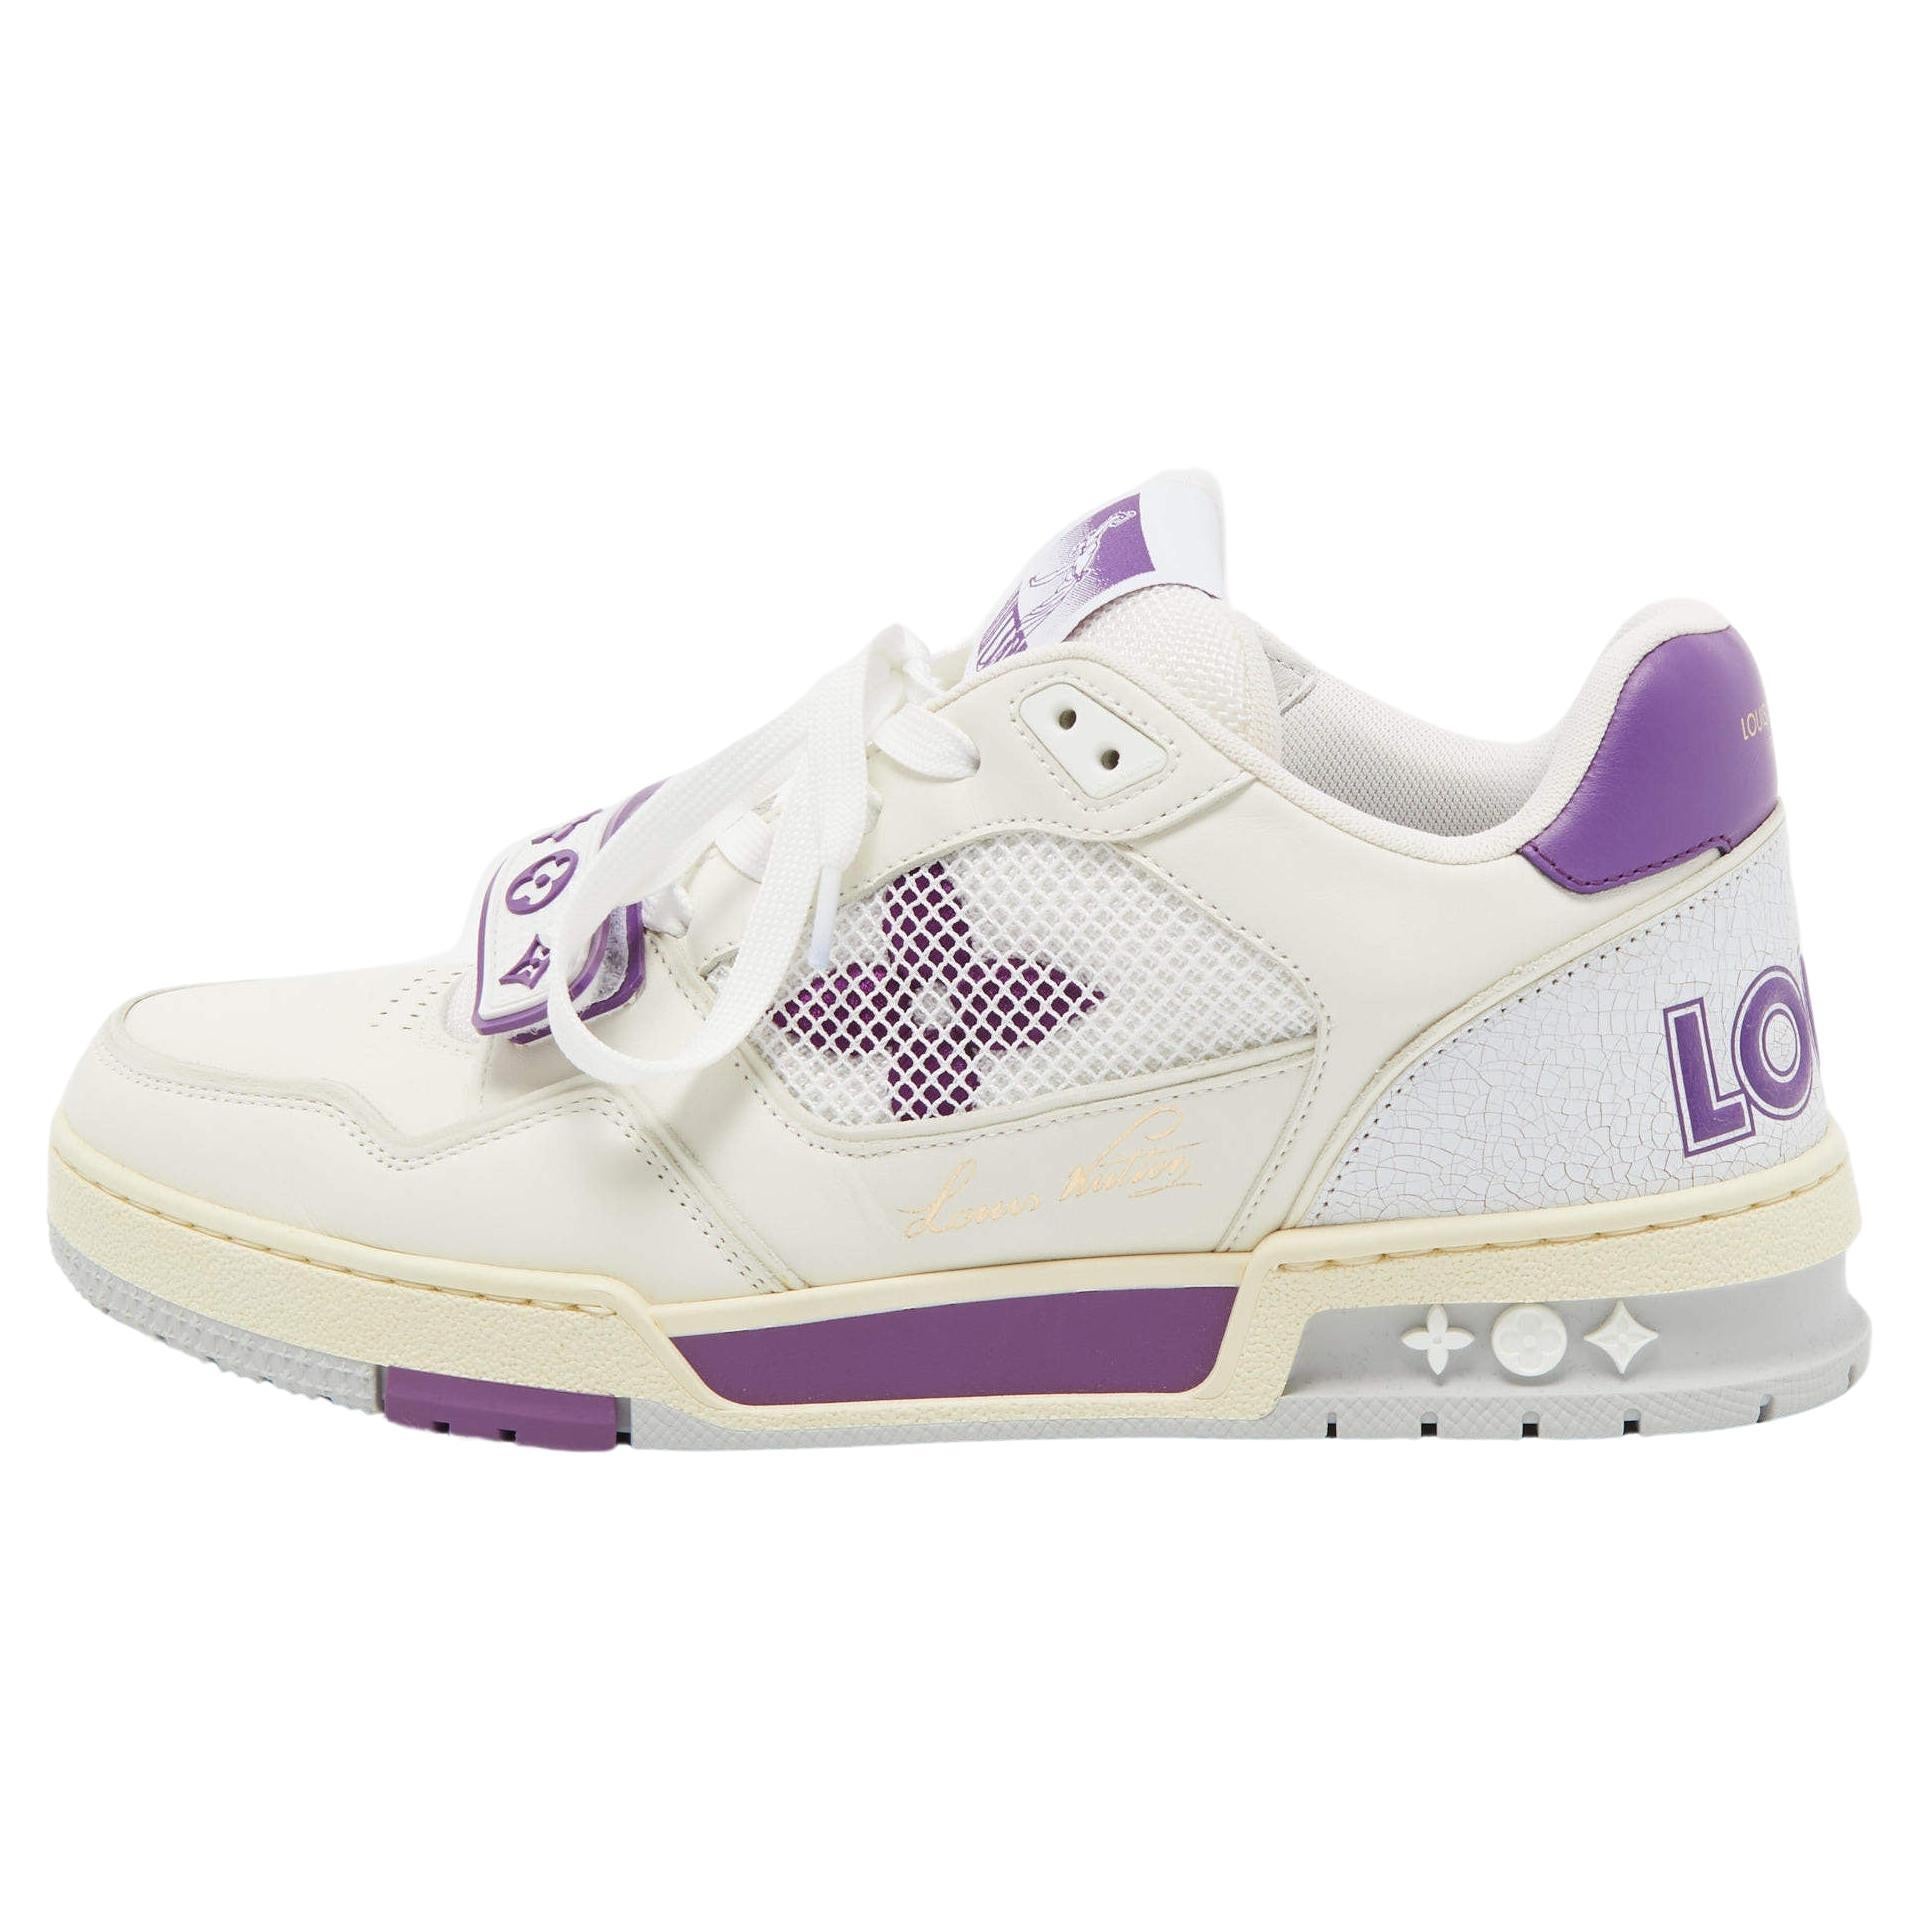 Louis Vuitton White/Purple Leather and Mesh LV Trainer Sneakers Size 41 For Sale